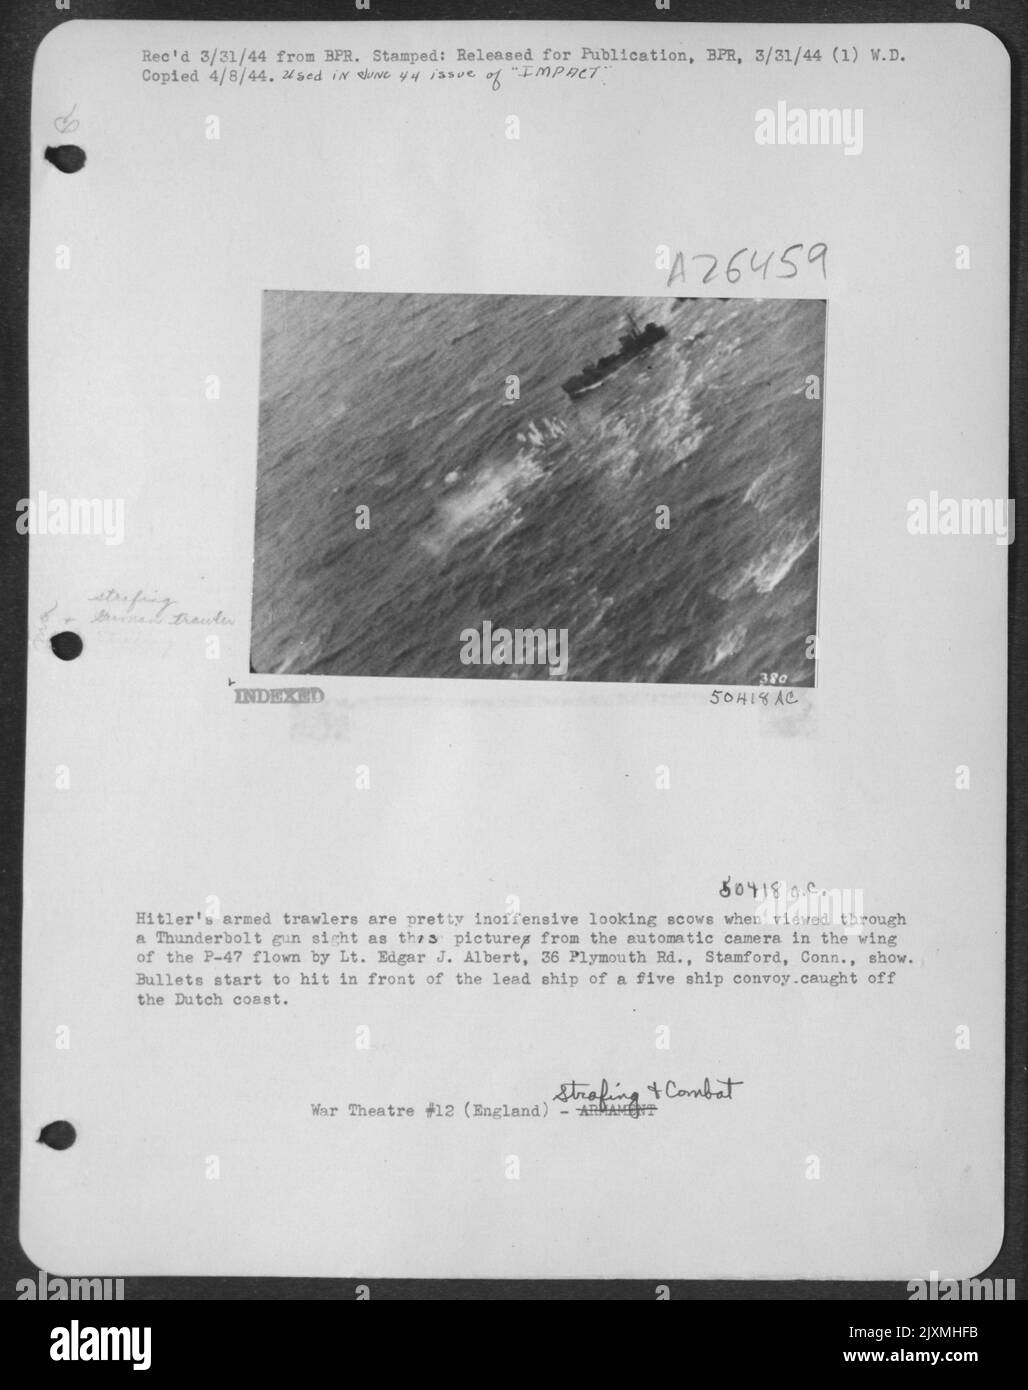 Hitler's armed trawlers are pretty inoffensive looking scows when viewed through a Thunderbolt gun sight as this picture from the automatic camera in the wing of the P-47 flown by Lt. Edgar J. Albert, 36 Plymouth Rd., Stamford, Conn., show. Bullets Stock Photo